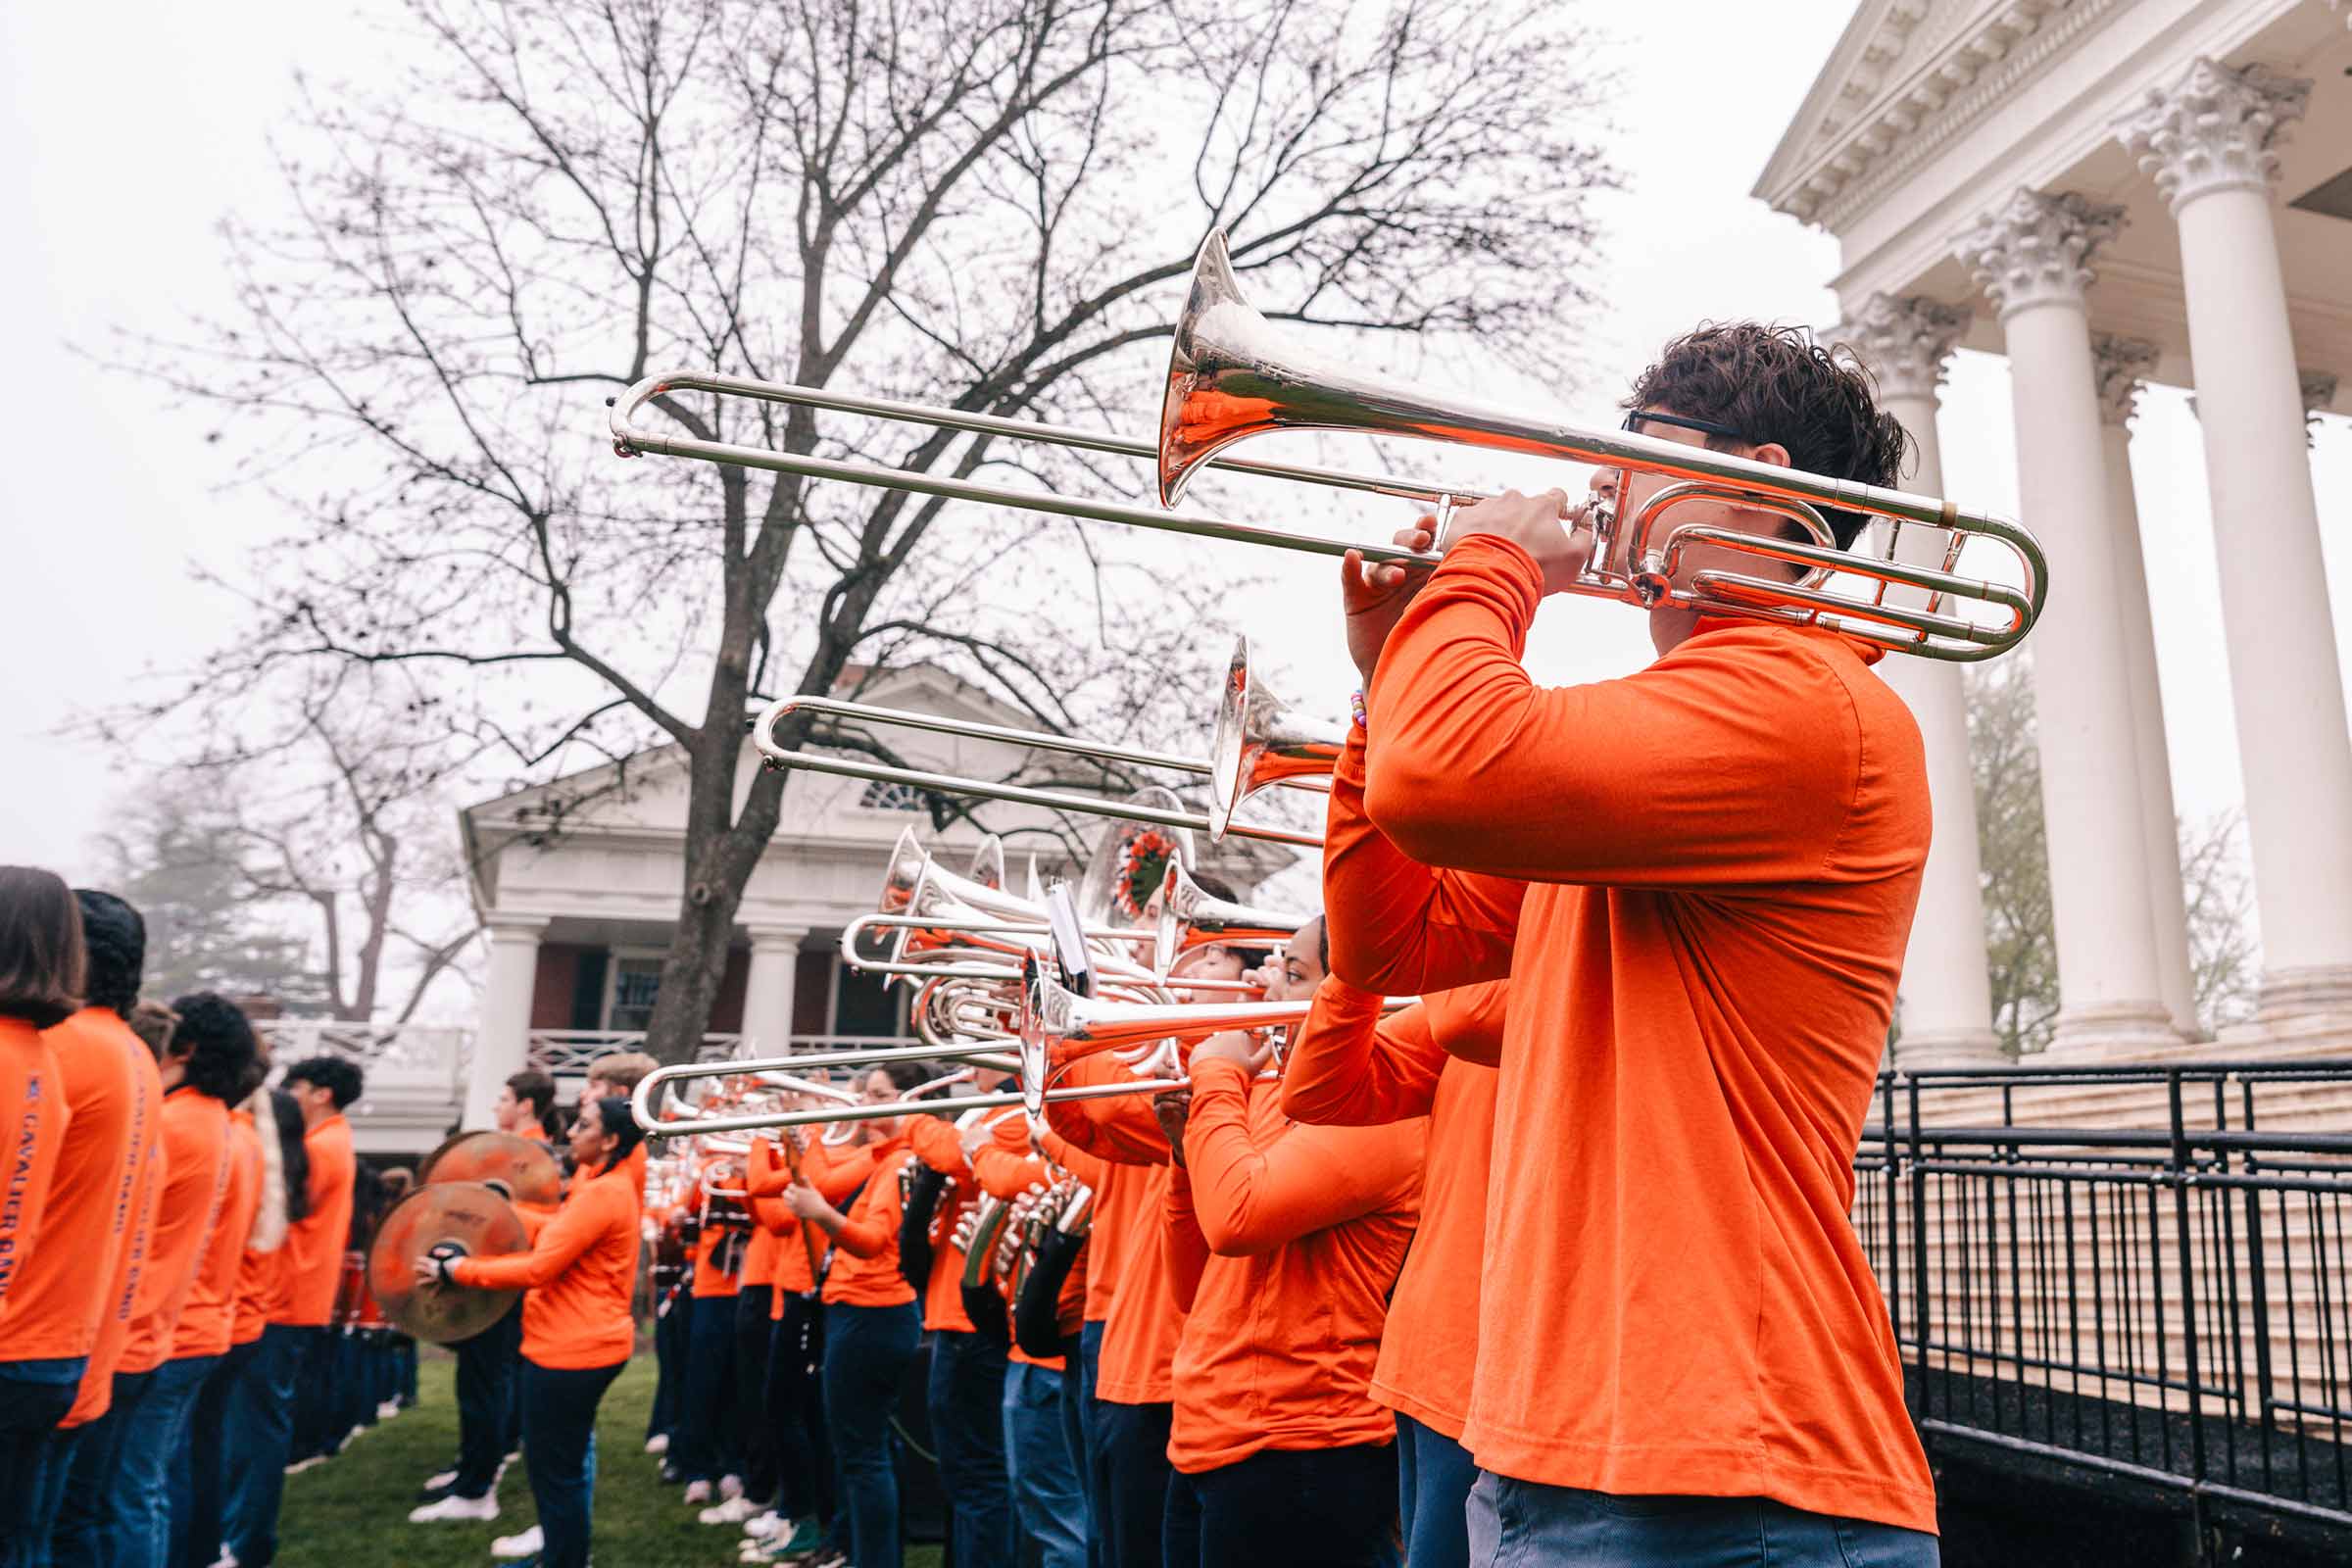 Trombone player stands in a row of fellow band members